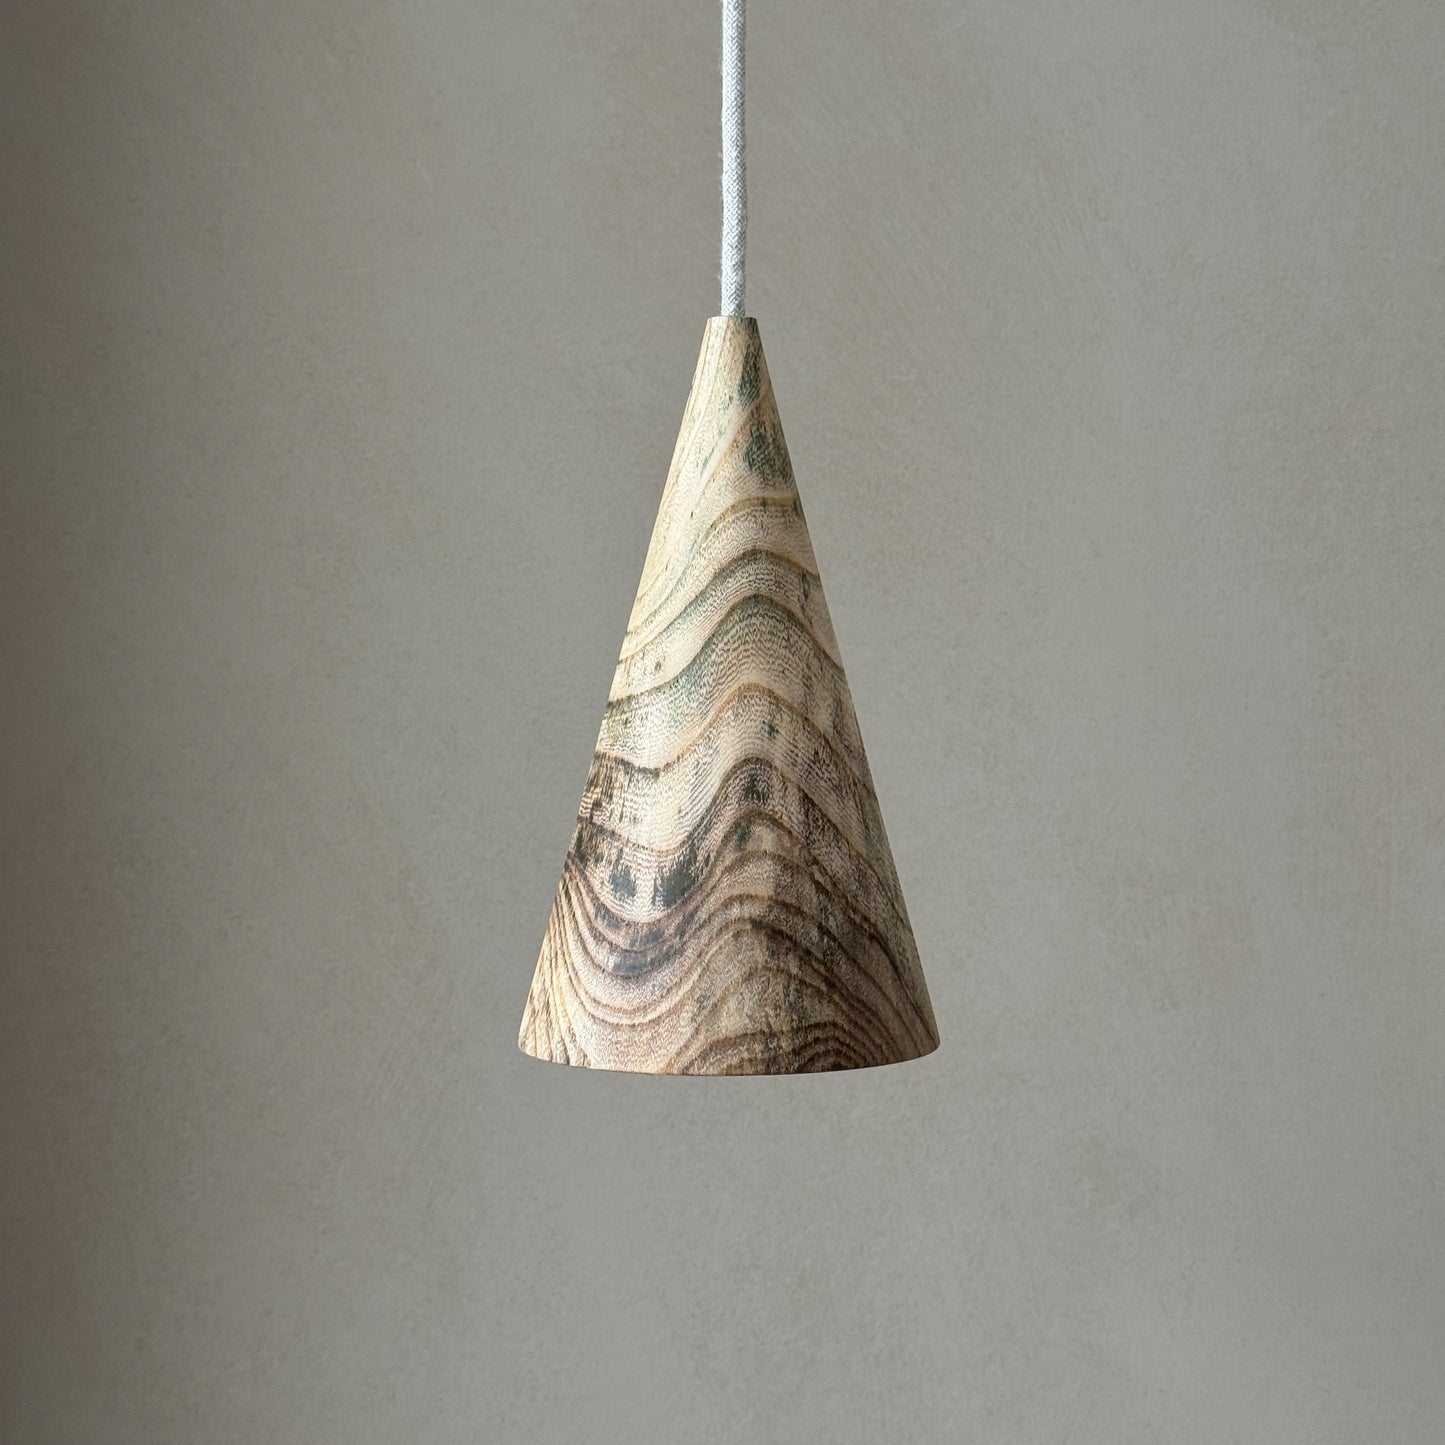 "There is no light without shadow" | Ceiling Conical Lamp